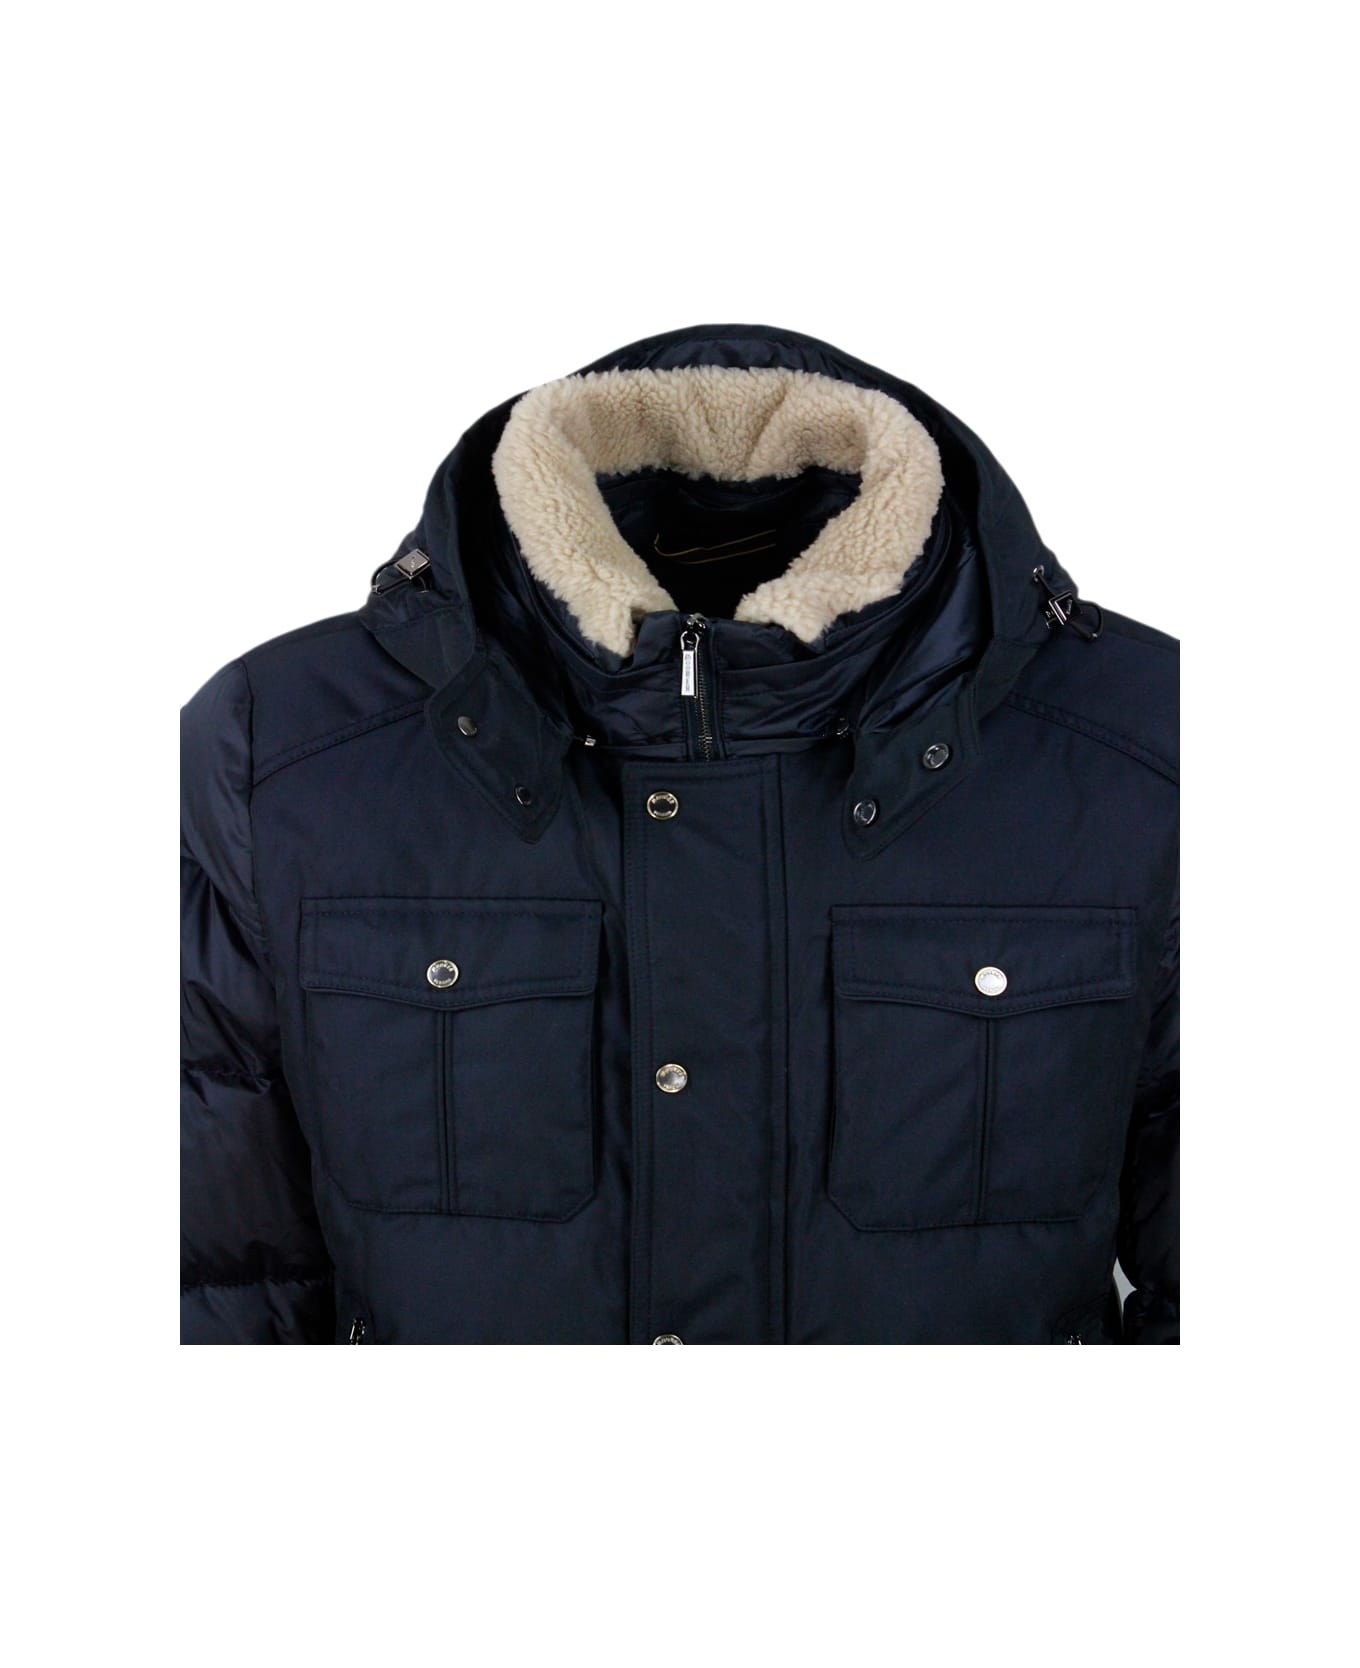 Moorer Bomber Jacket Padded With Goose Feathers With Removable Hood And Collar In Curly Sheepskin, Front And Shoulders In Material, Closure With Zip And Butt - Blu ダウンジャケット